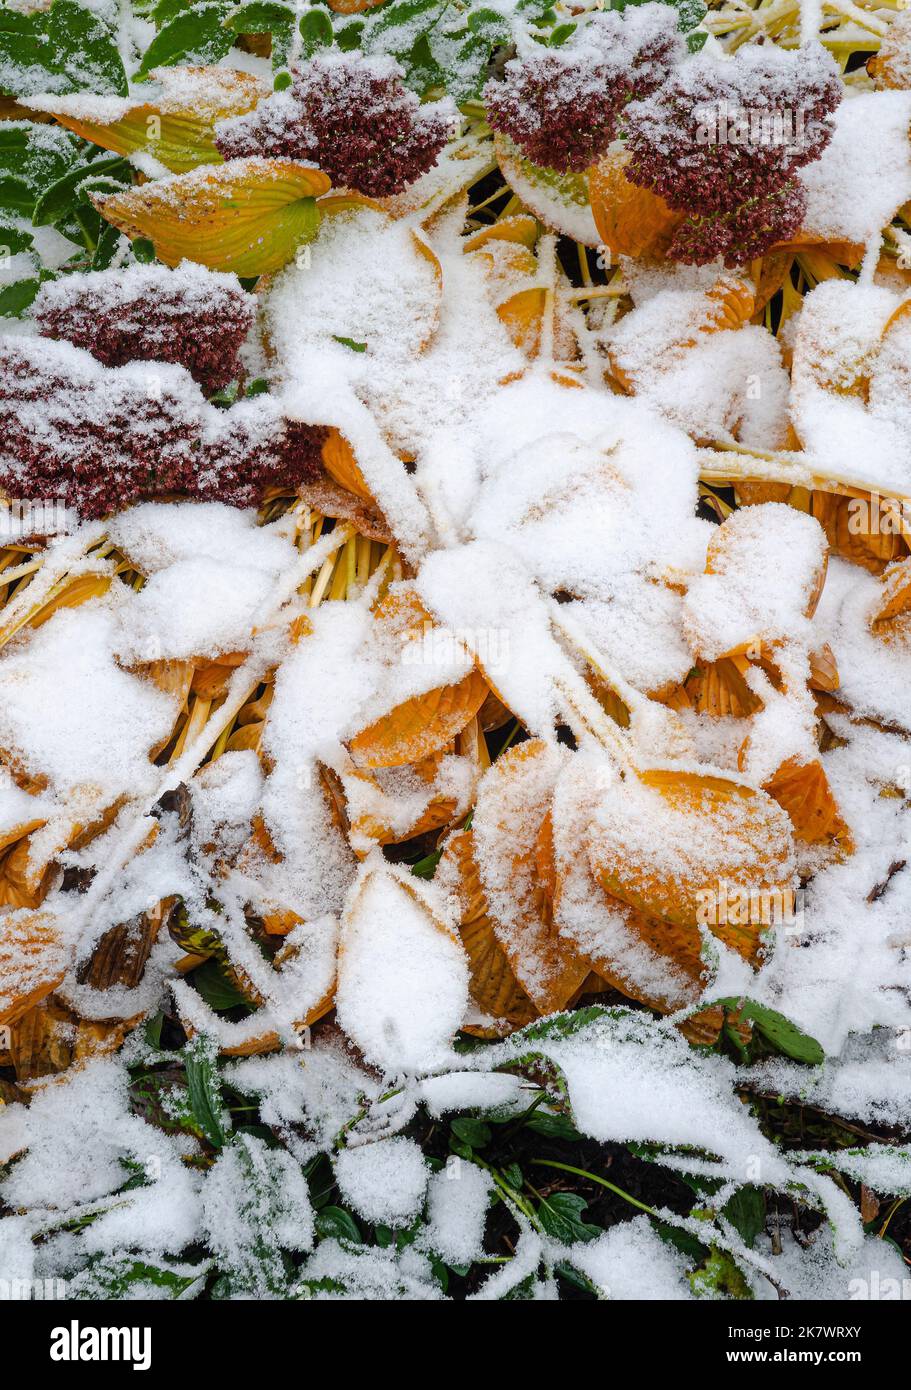 Hosta leaves turn golden in autumn and are covered in a rare October snow storm in a suburban garden, Shorewood, Will County, Illinois Stock Photo